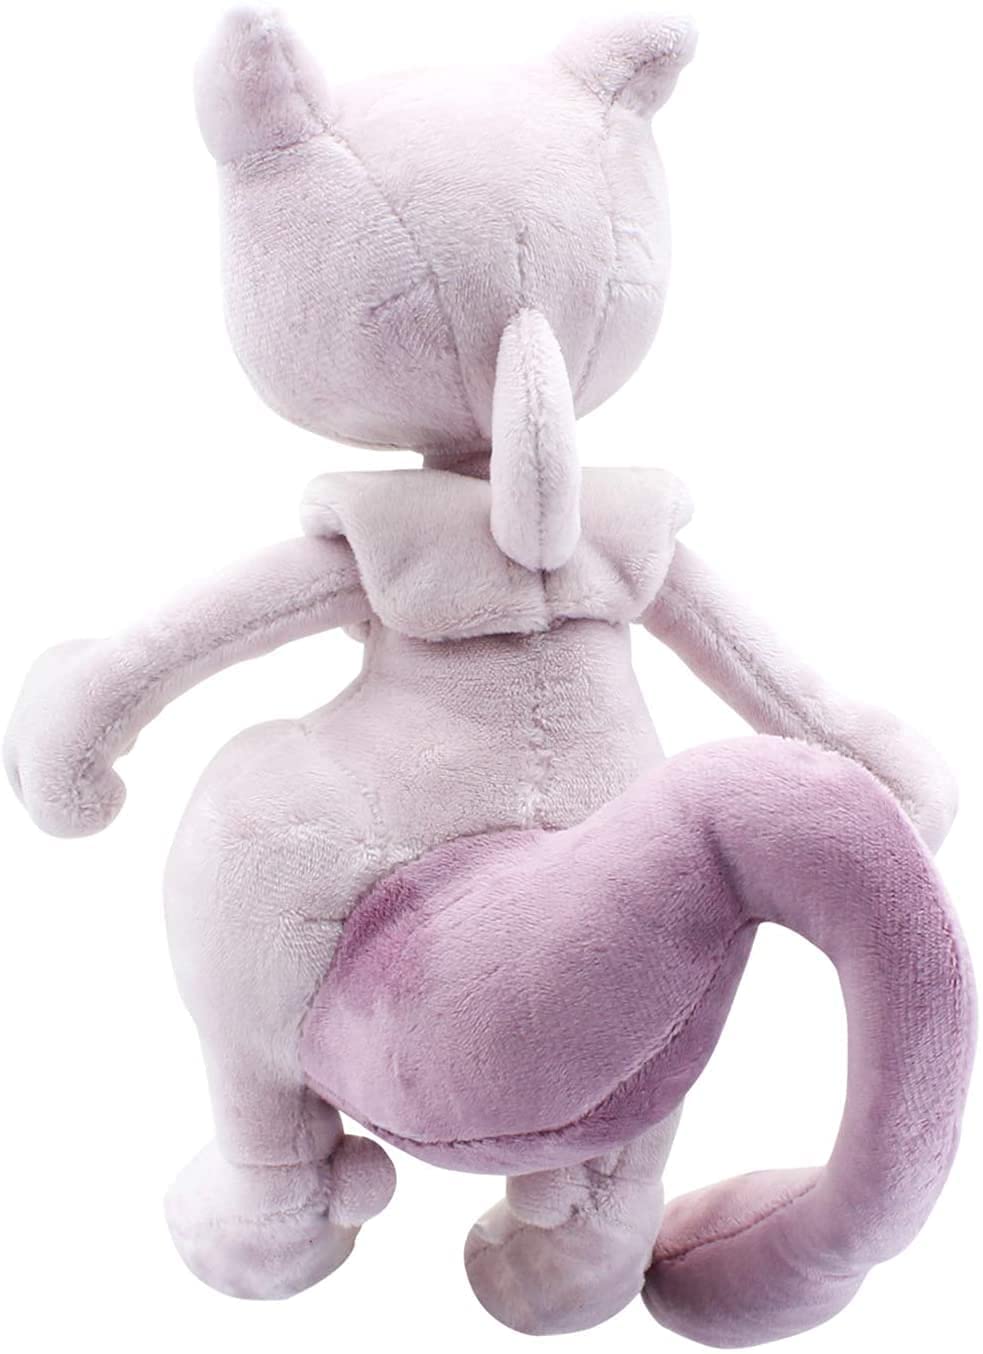 Sanei All Star Collection 10 Inch Plush - Mewtwo PP024